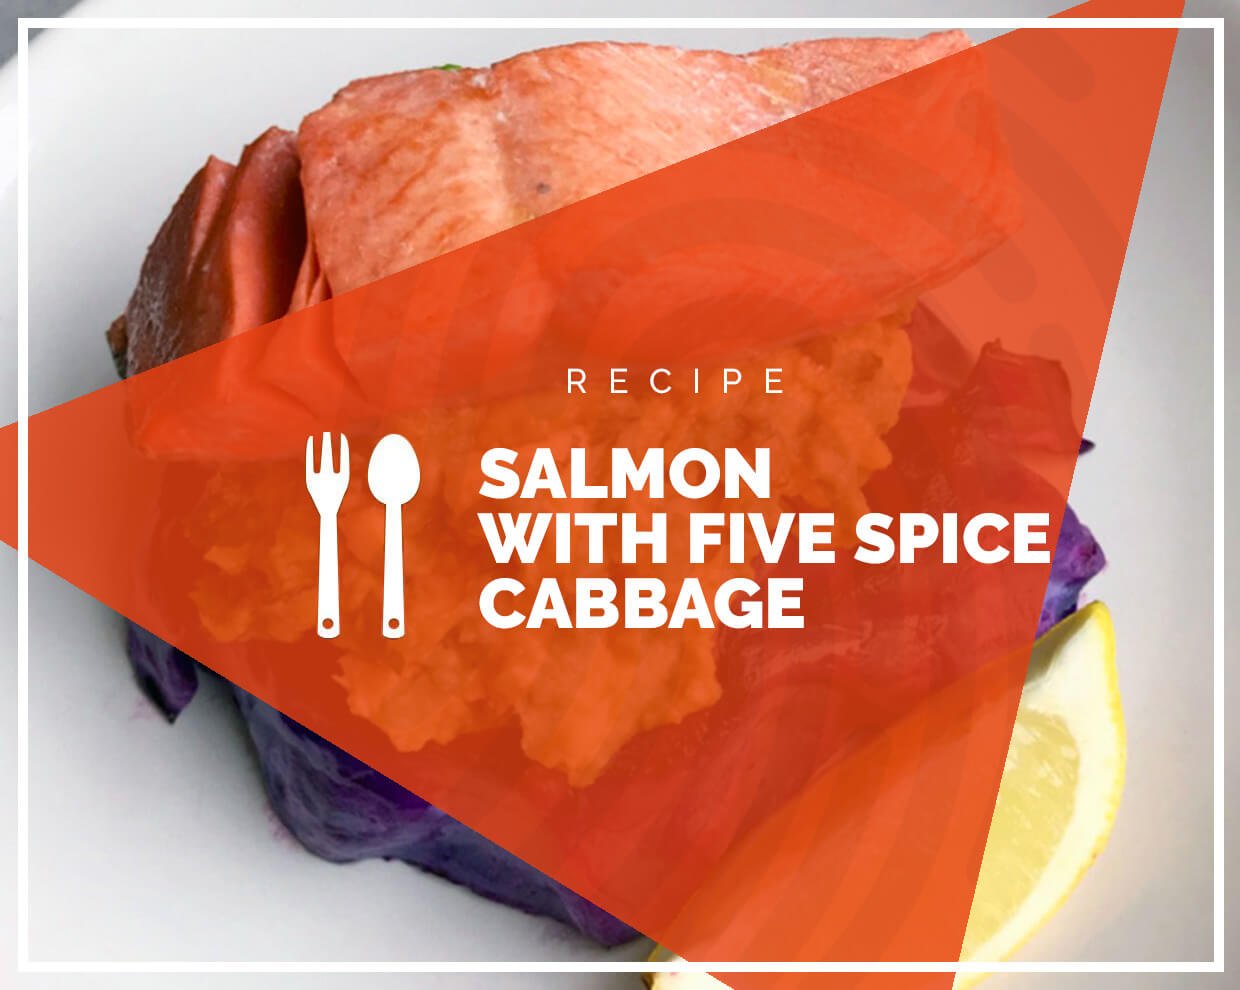 Salmon with five spice cabbage 